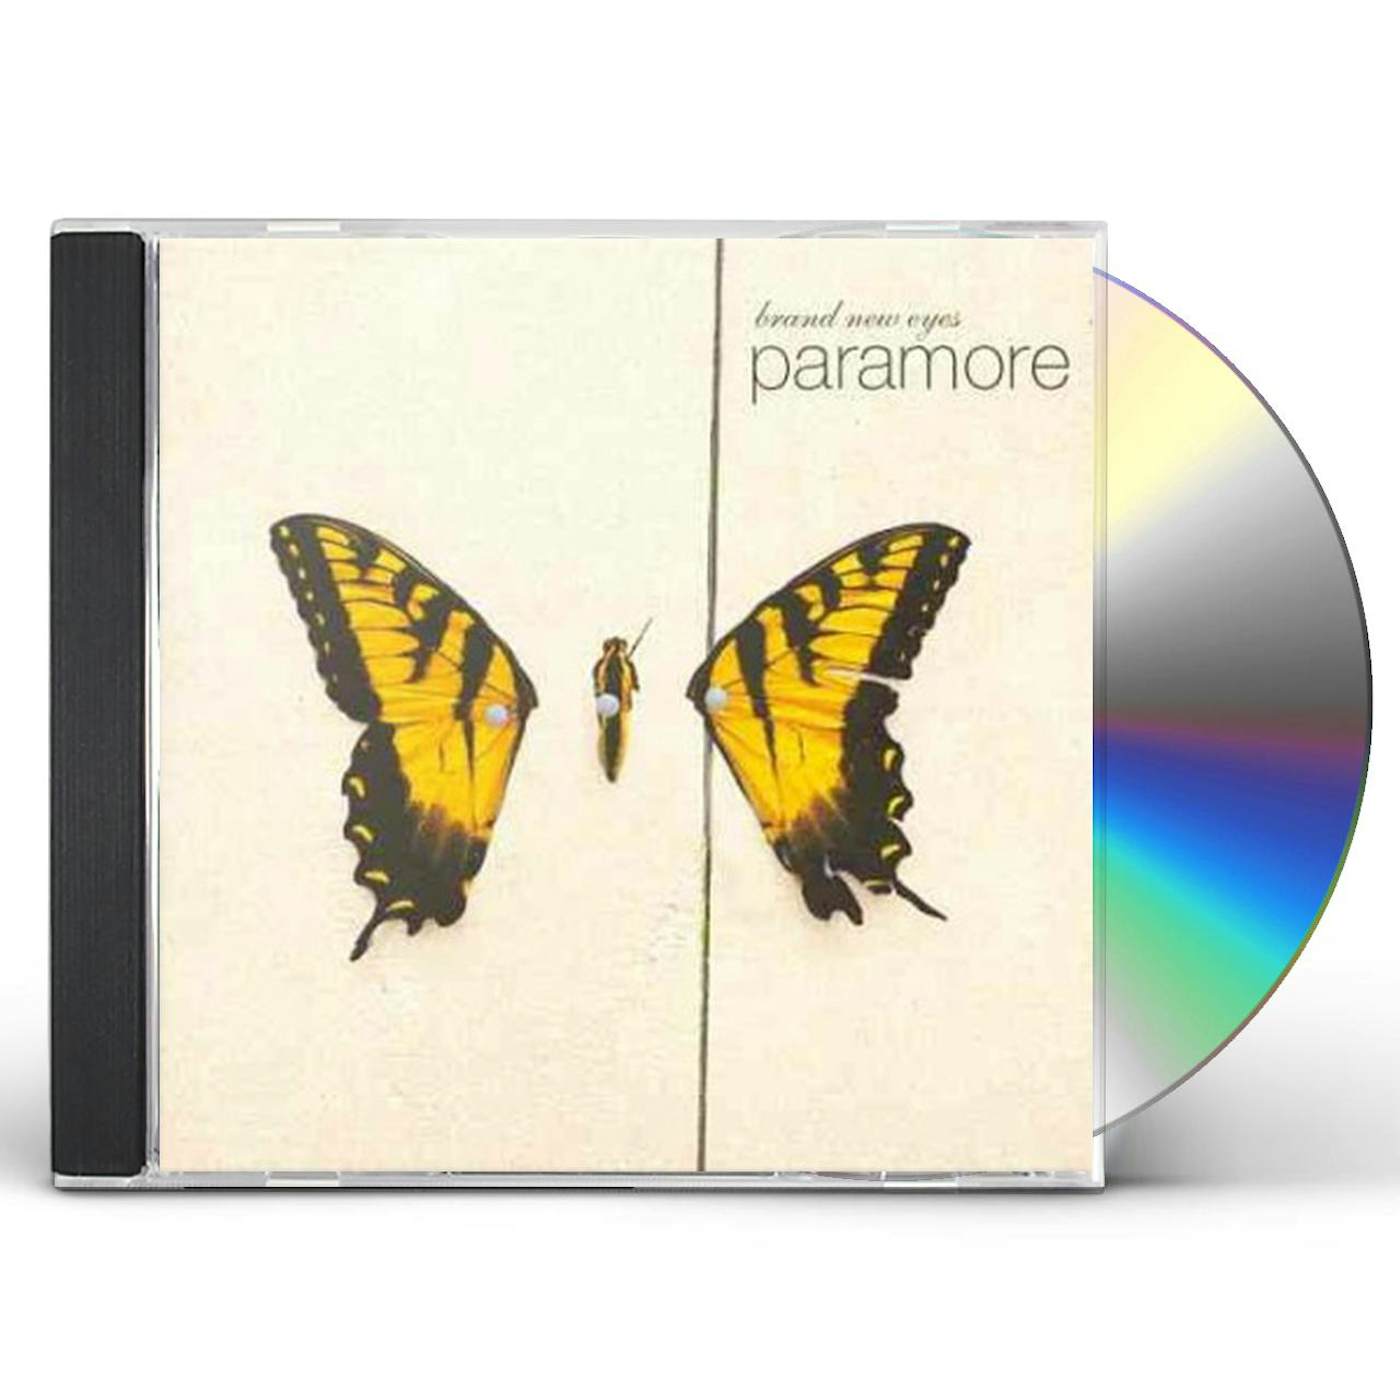 PARAMORE - BRAND New Eyes CD - Like New Free Postage $9.95